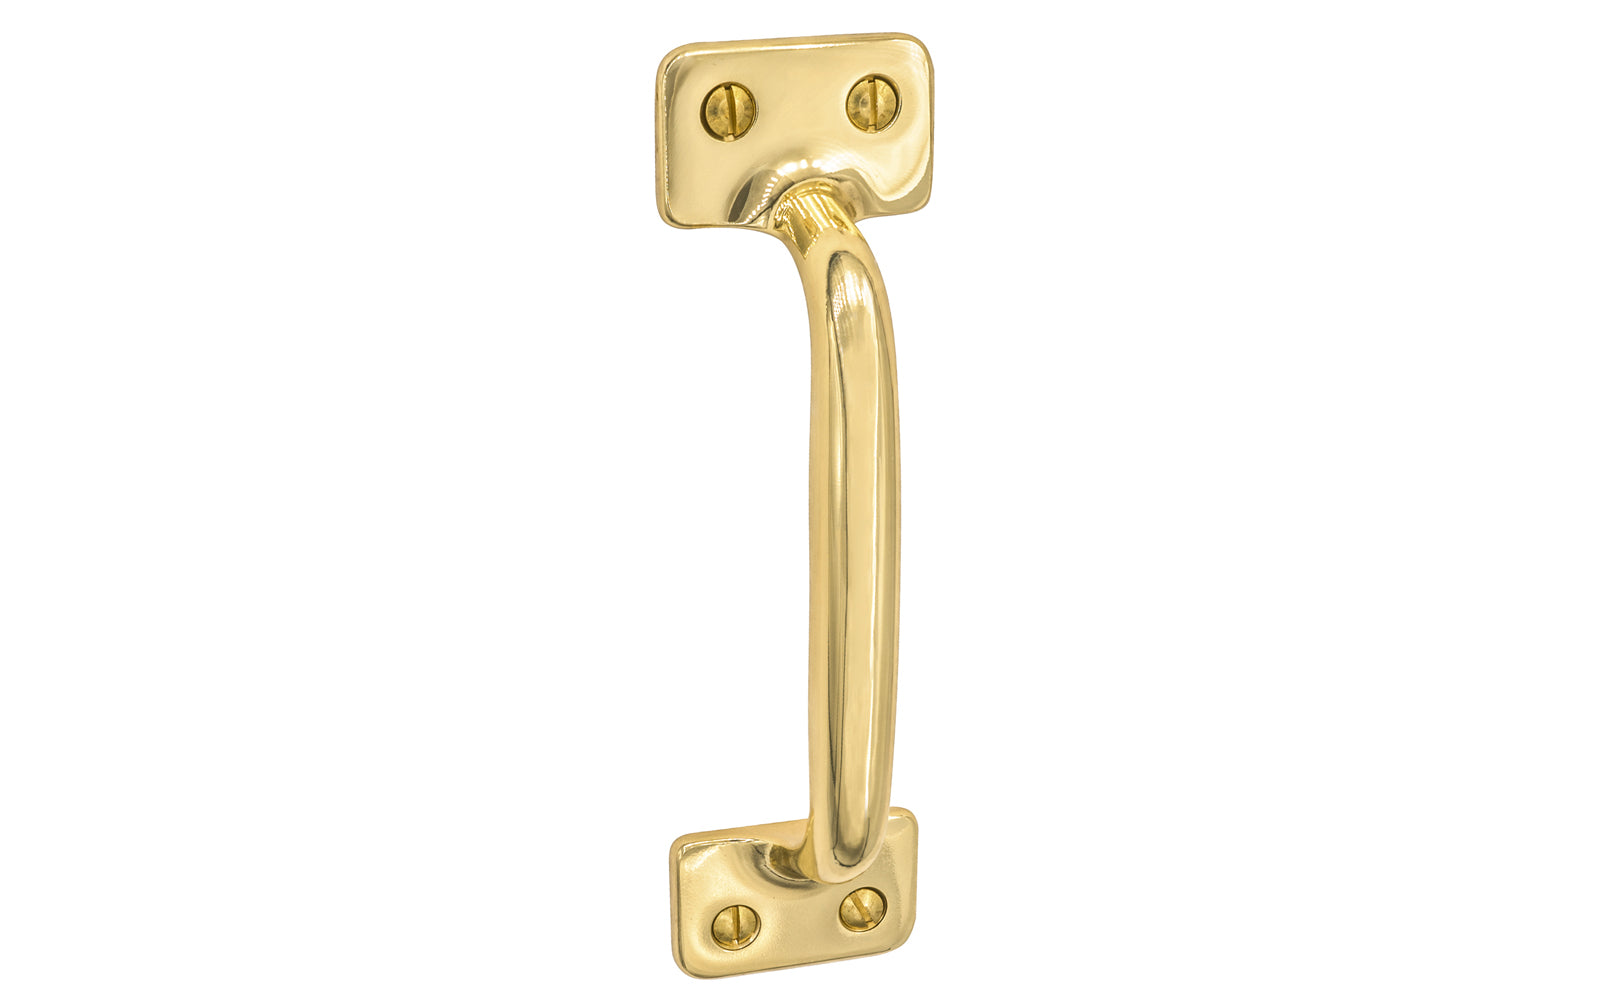 Vintage-style Hardware · Classic Solid Brass Handle Pull ~ 4-3/8" On Centers. Versatile handle is great for sash windows, cabinets, drawers, file cabinets. Arts & Crafts handle pull. Unlacquered Brass (will patina over time). Un-lacquered brass. Non-lacquered brass.